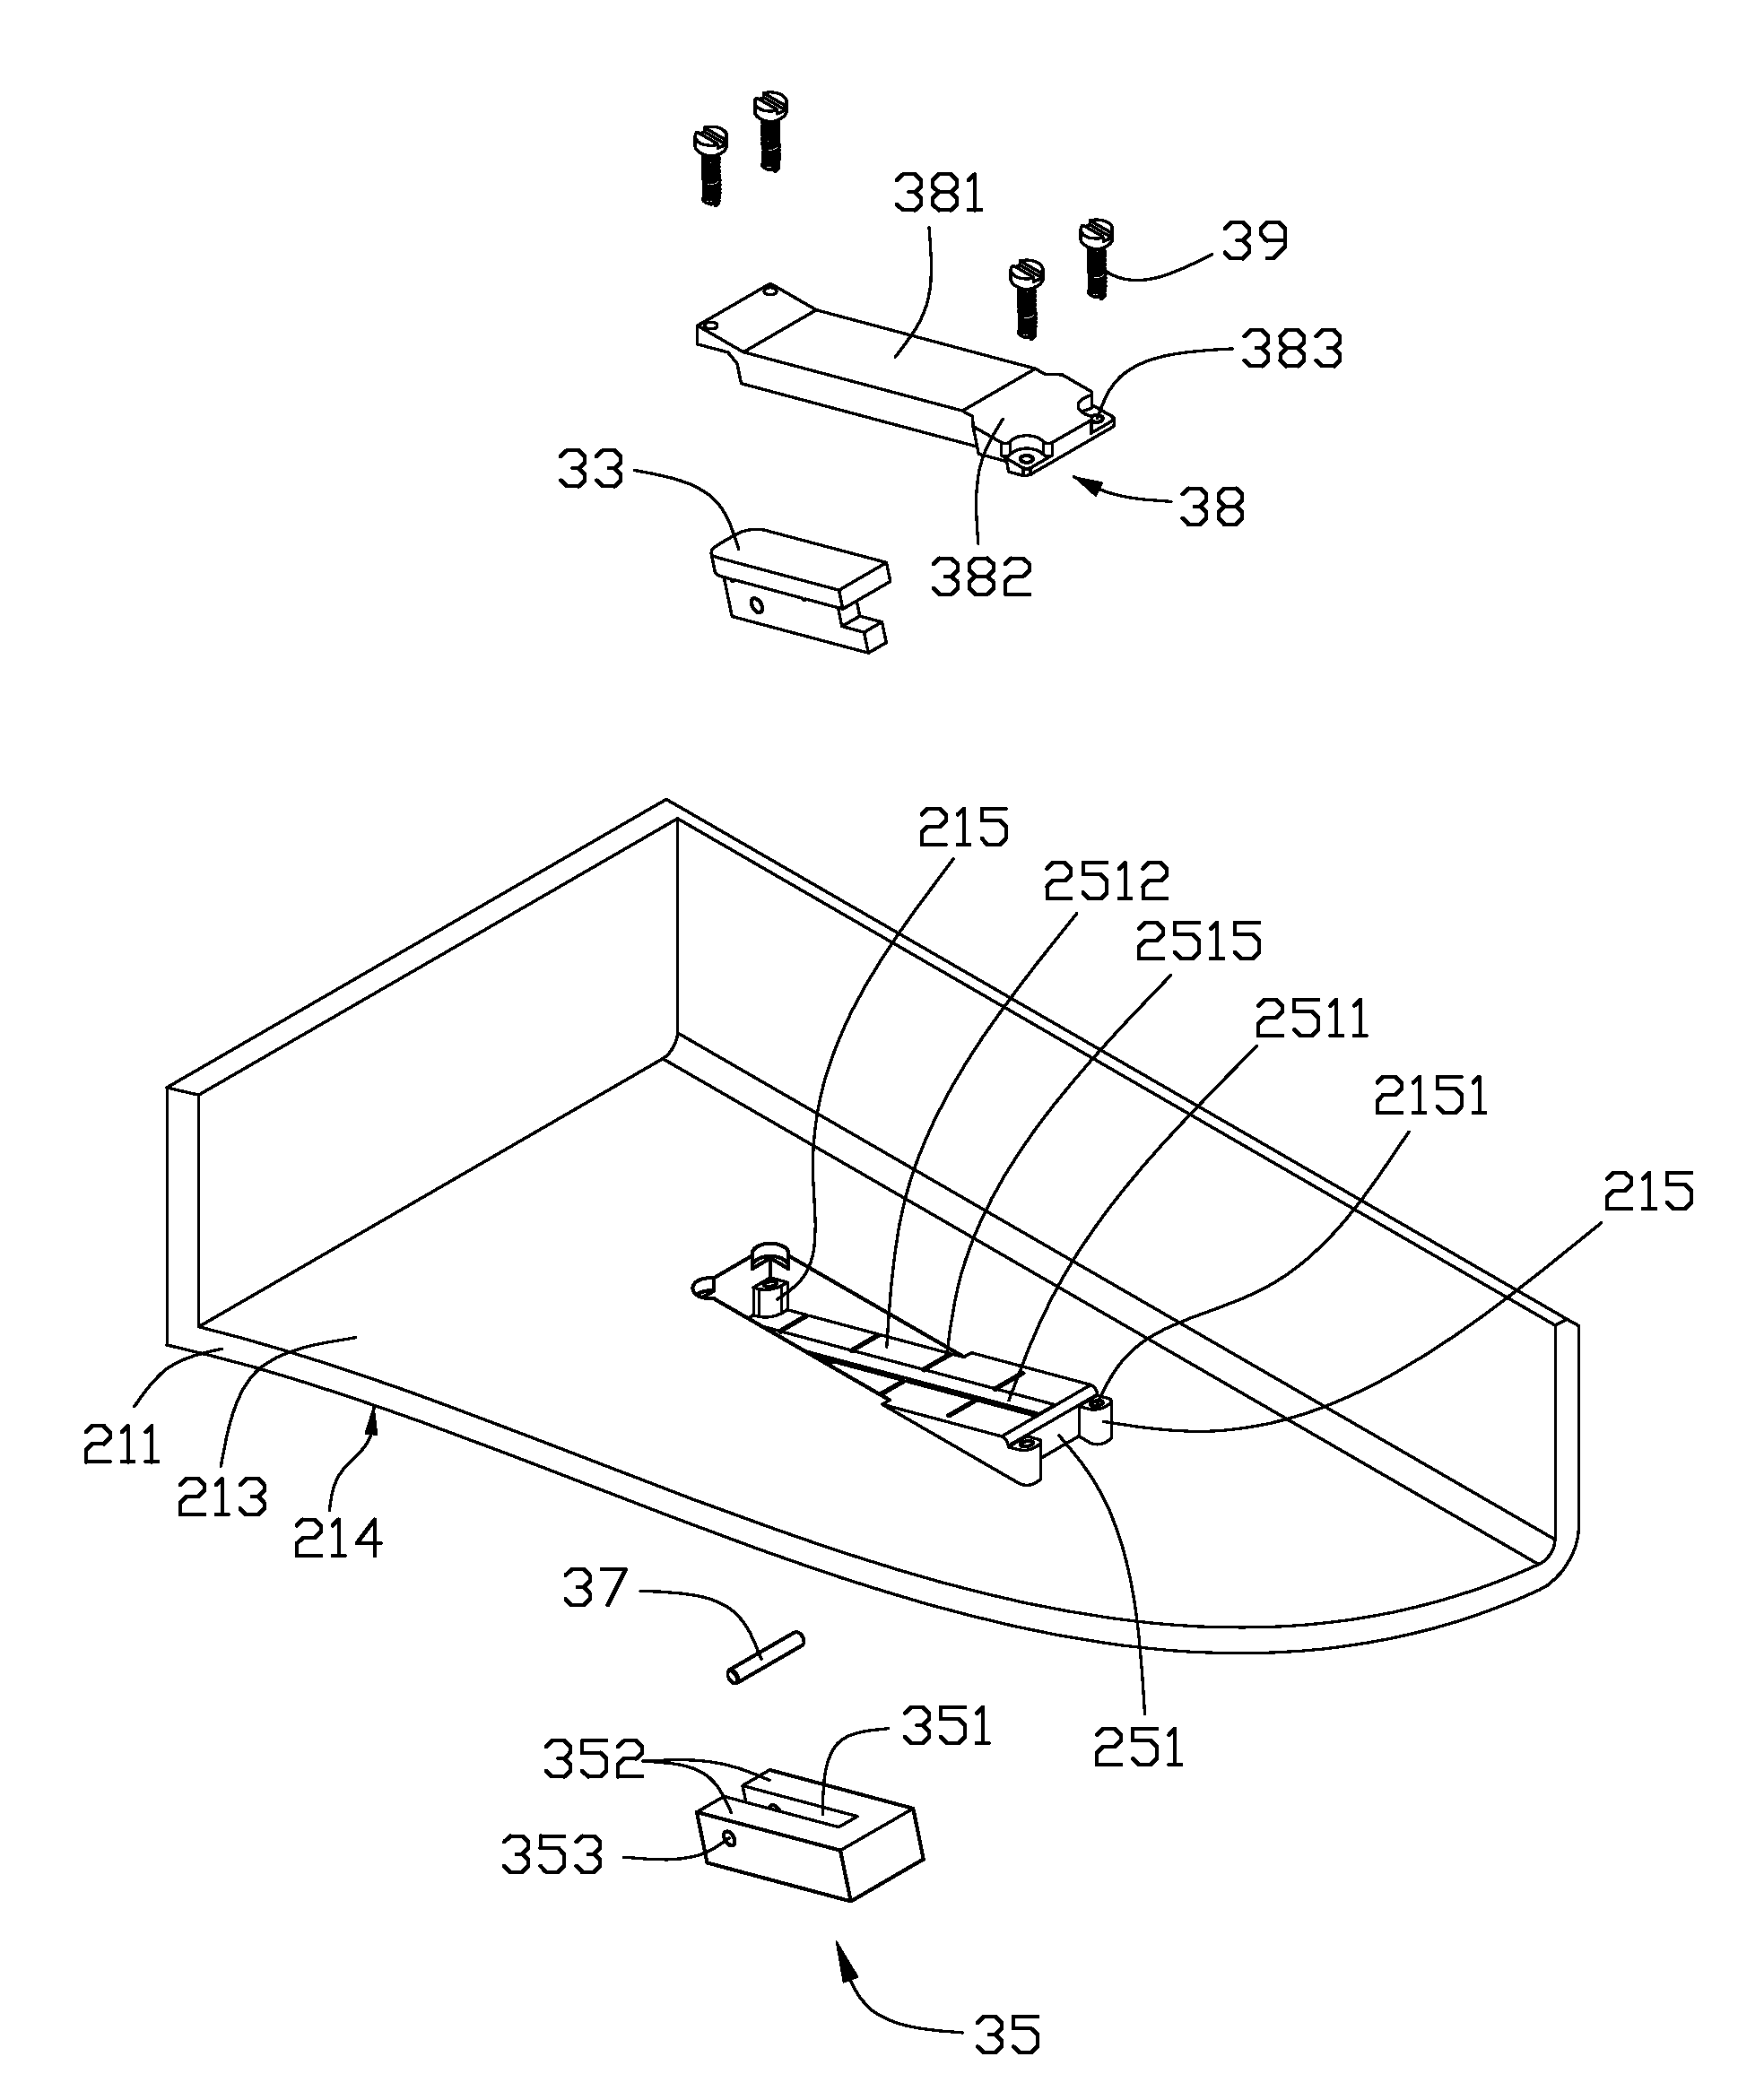 Electronic device with support legs